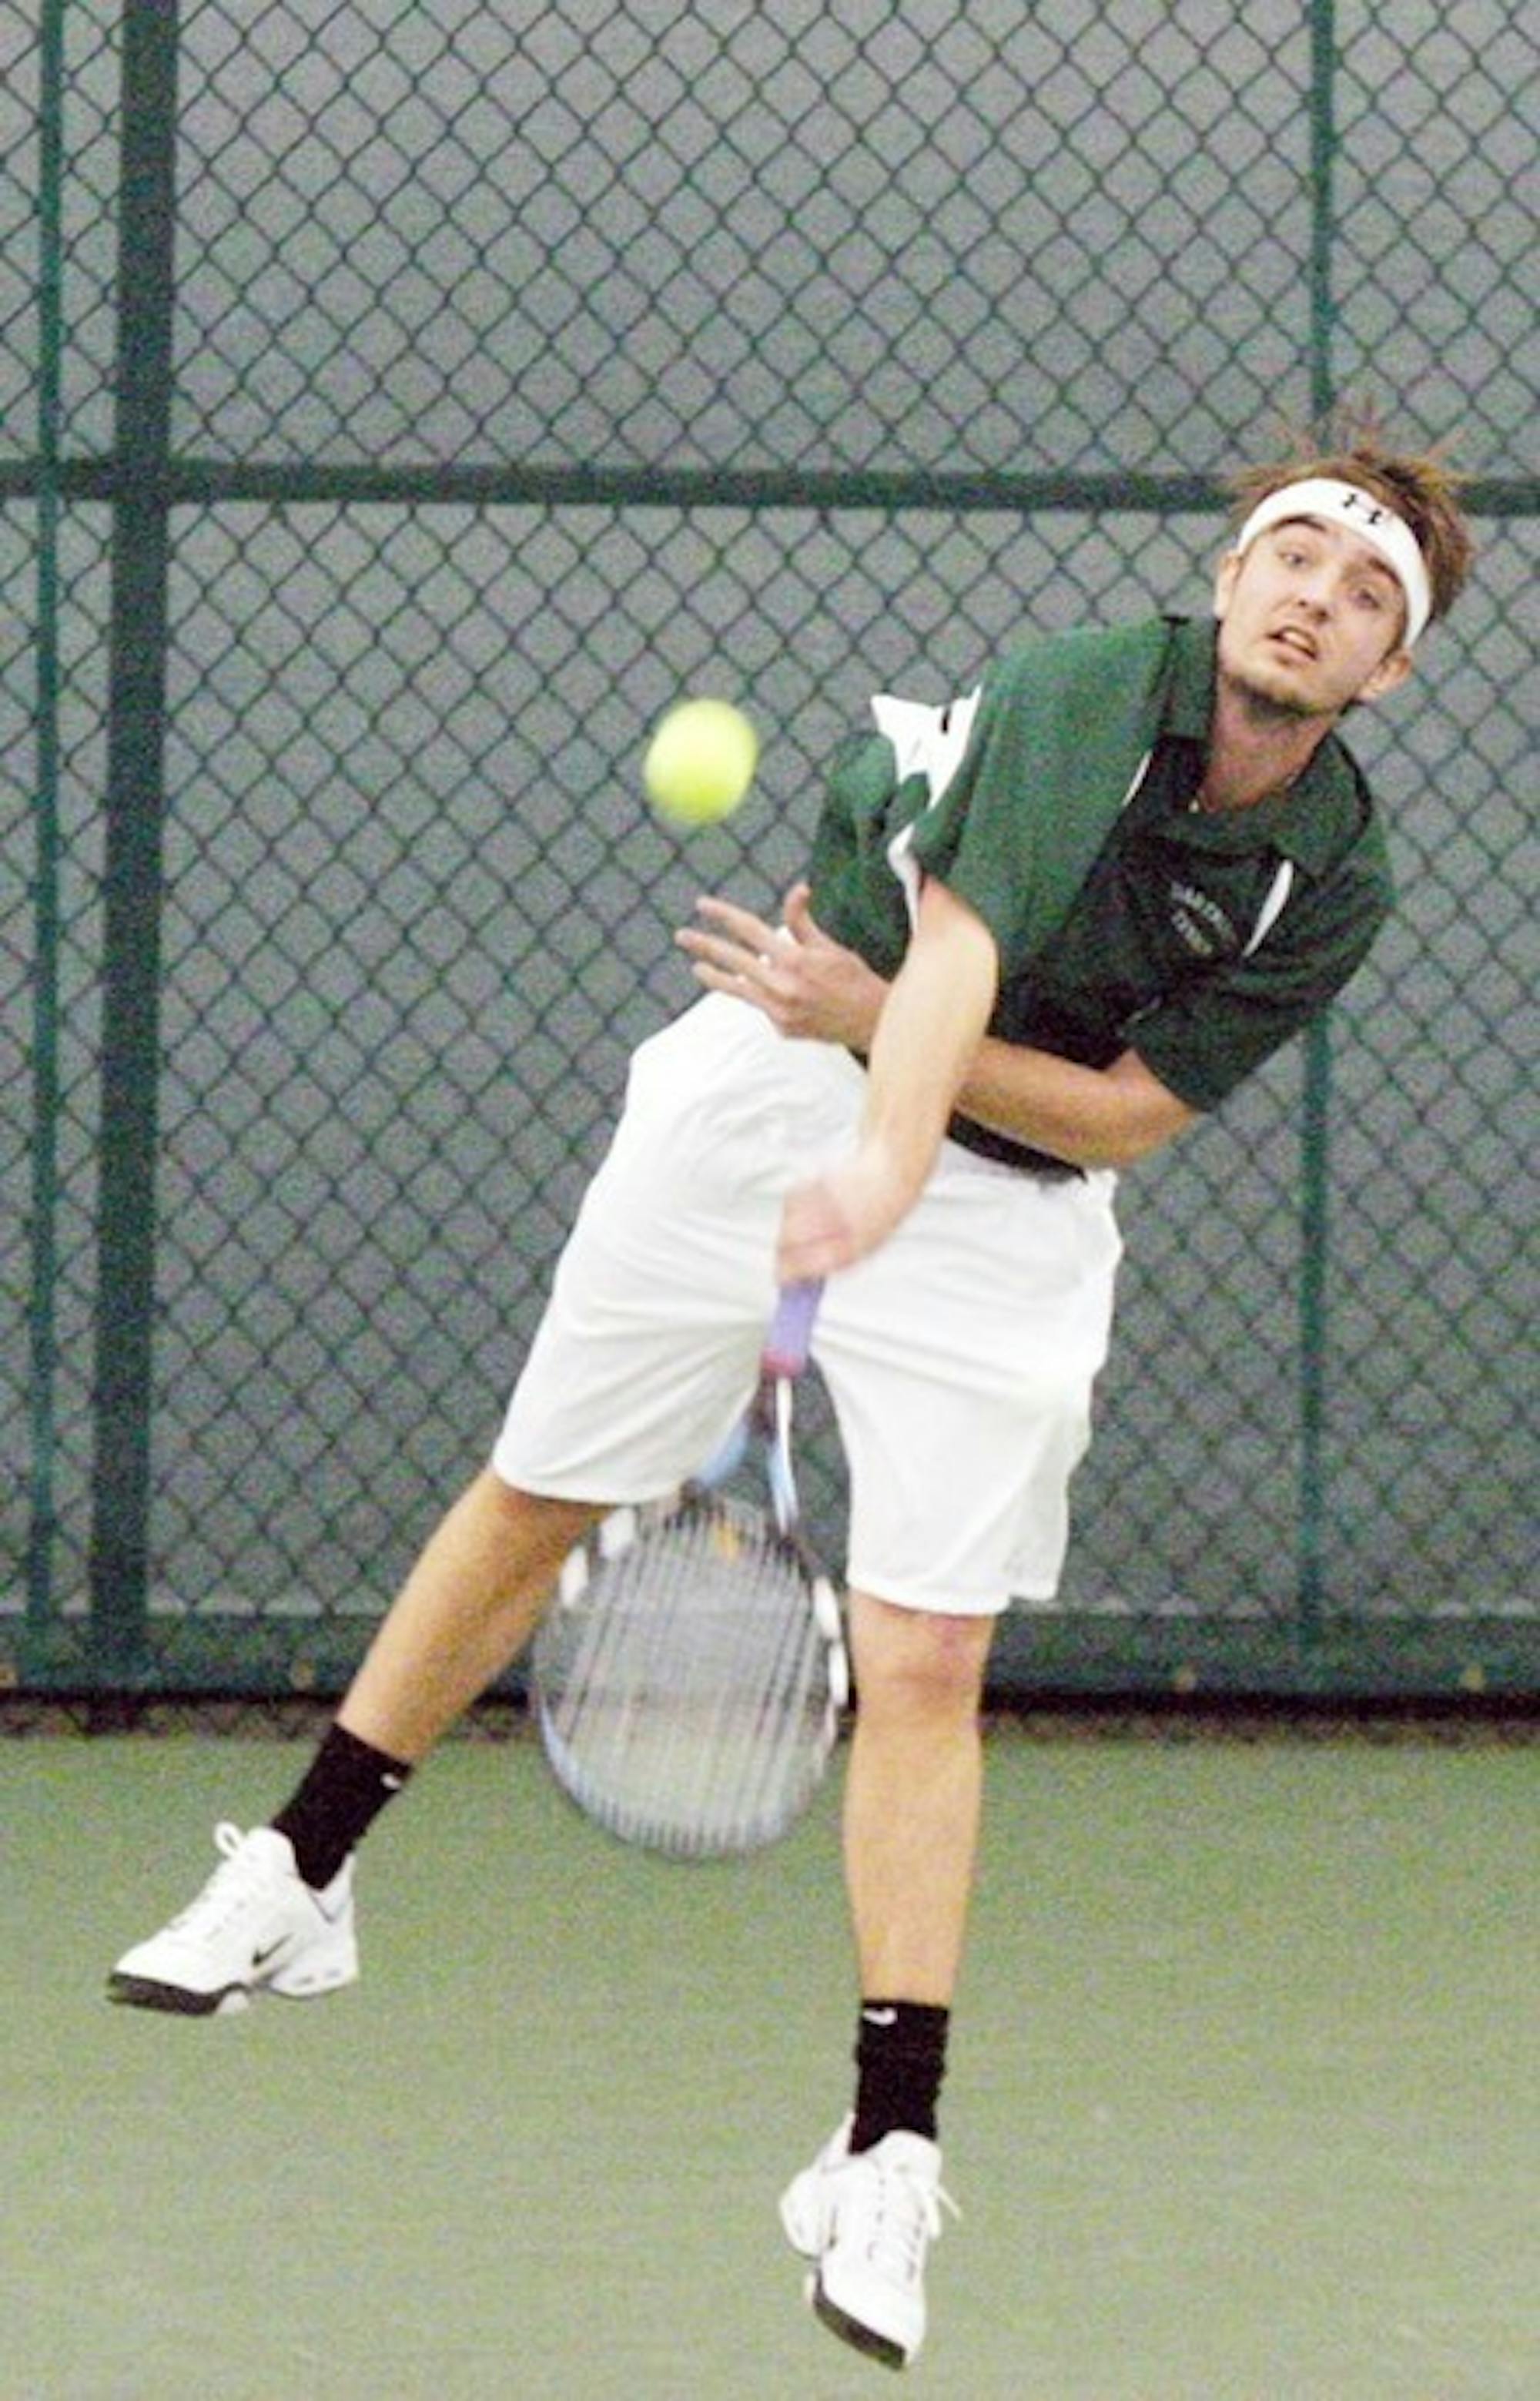 Times are tough in the world of Dartmouth men's tennis. With two losses over the weekend, team has dropped 10 of its last 11 matches.